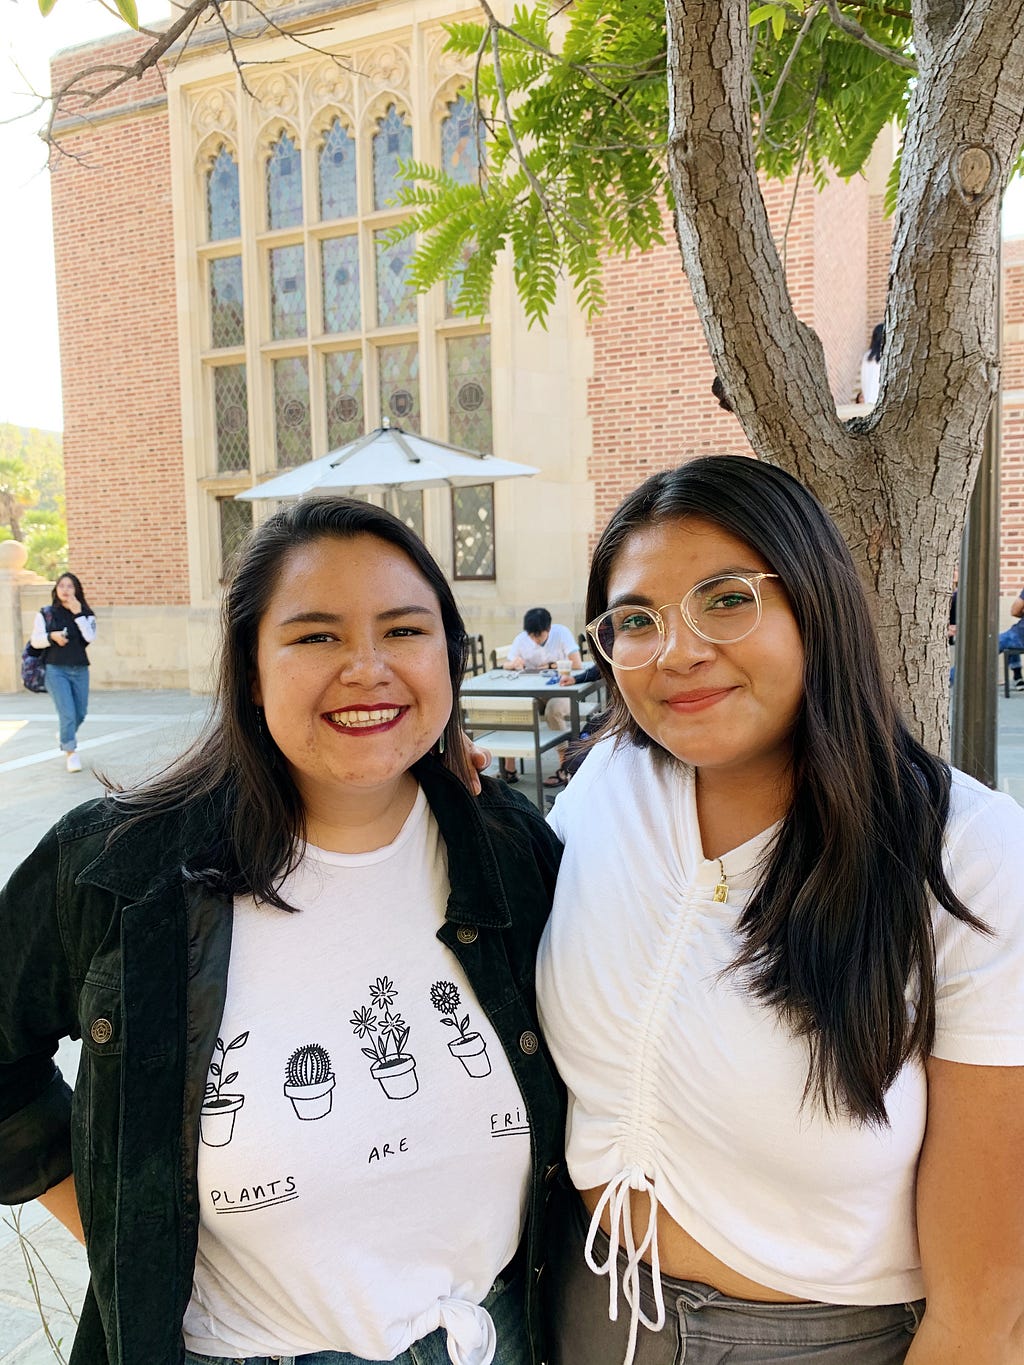 Editor-in-Chief Myrka Vega (left) and Managing Editor Angela Vargas (right) pictured at Kerckhoff patio on the UCLA campus.